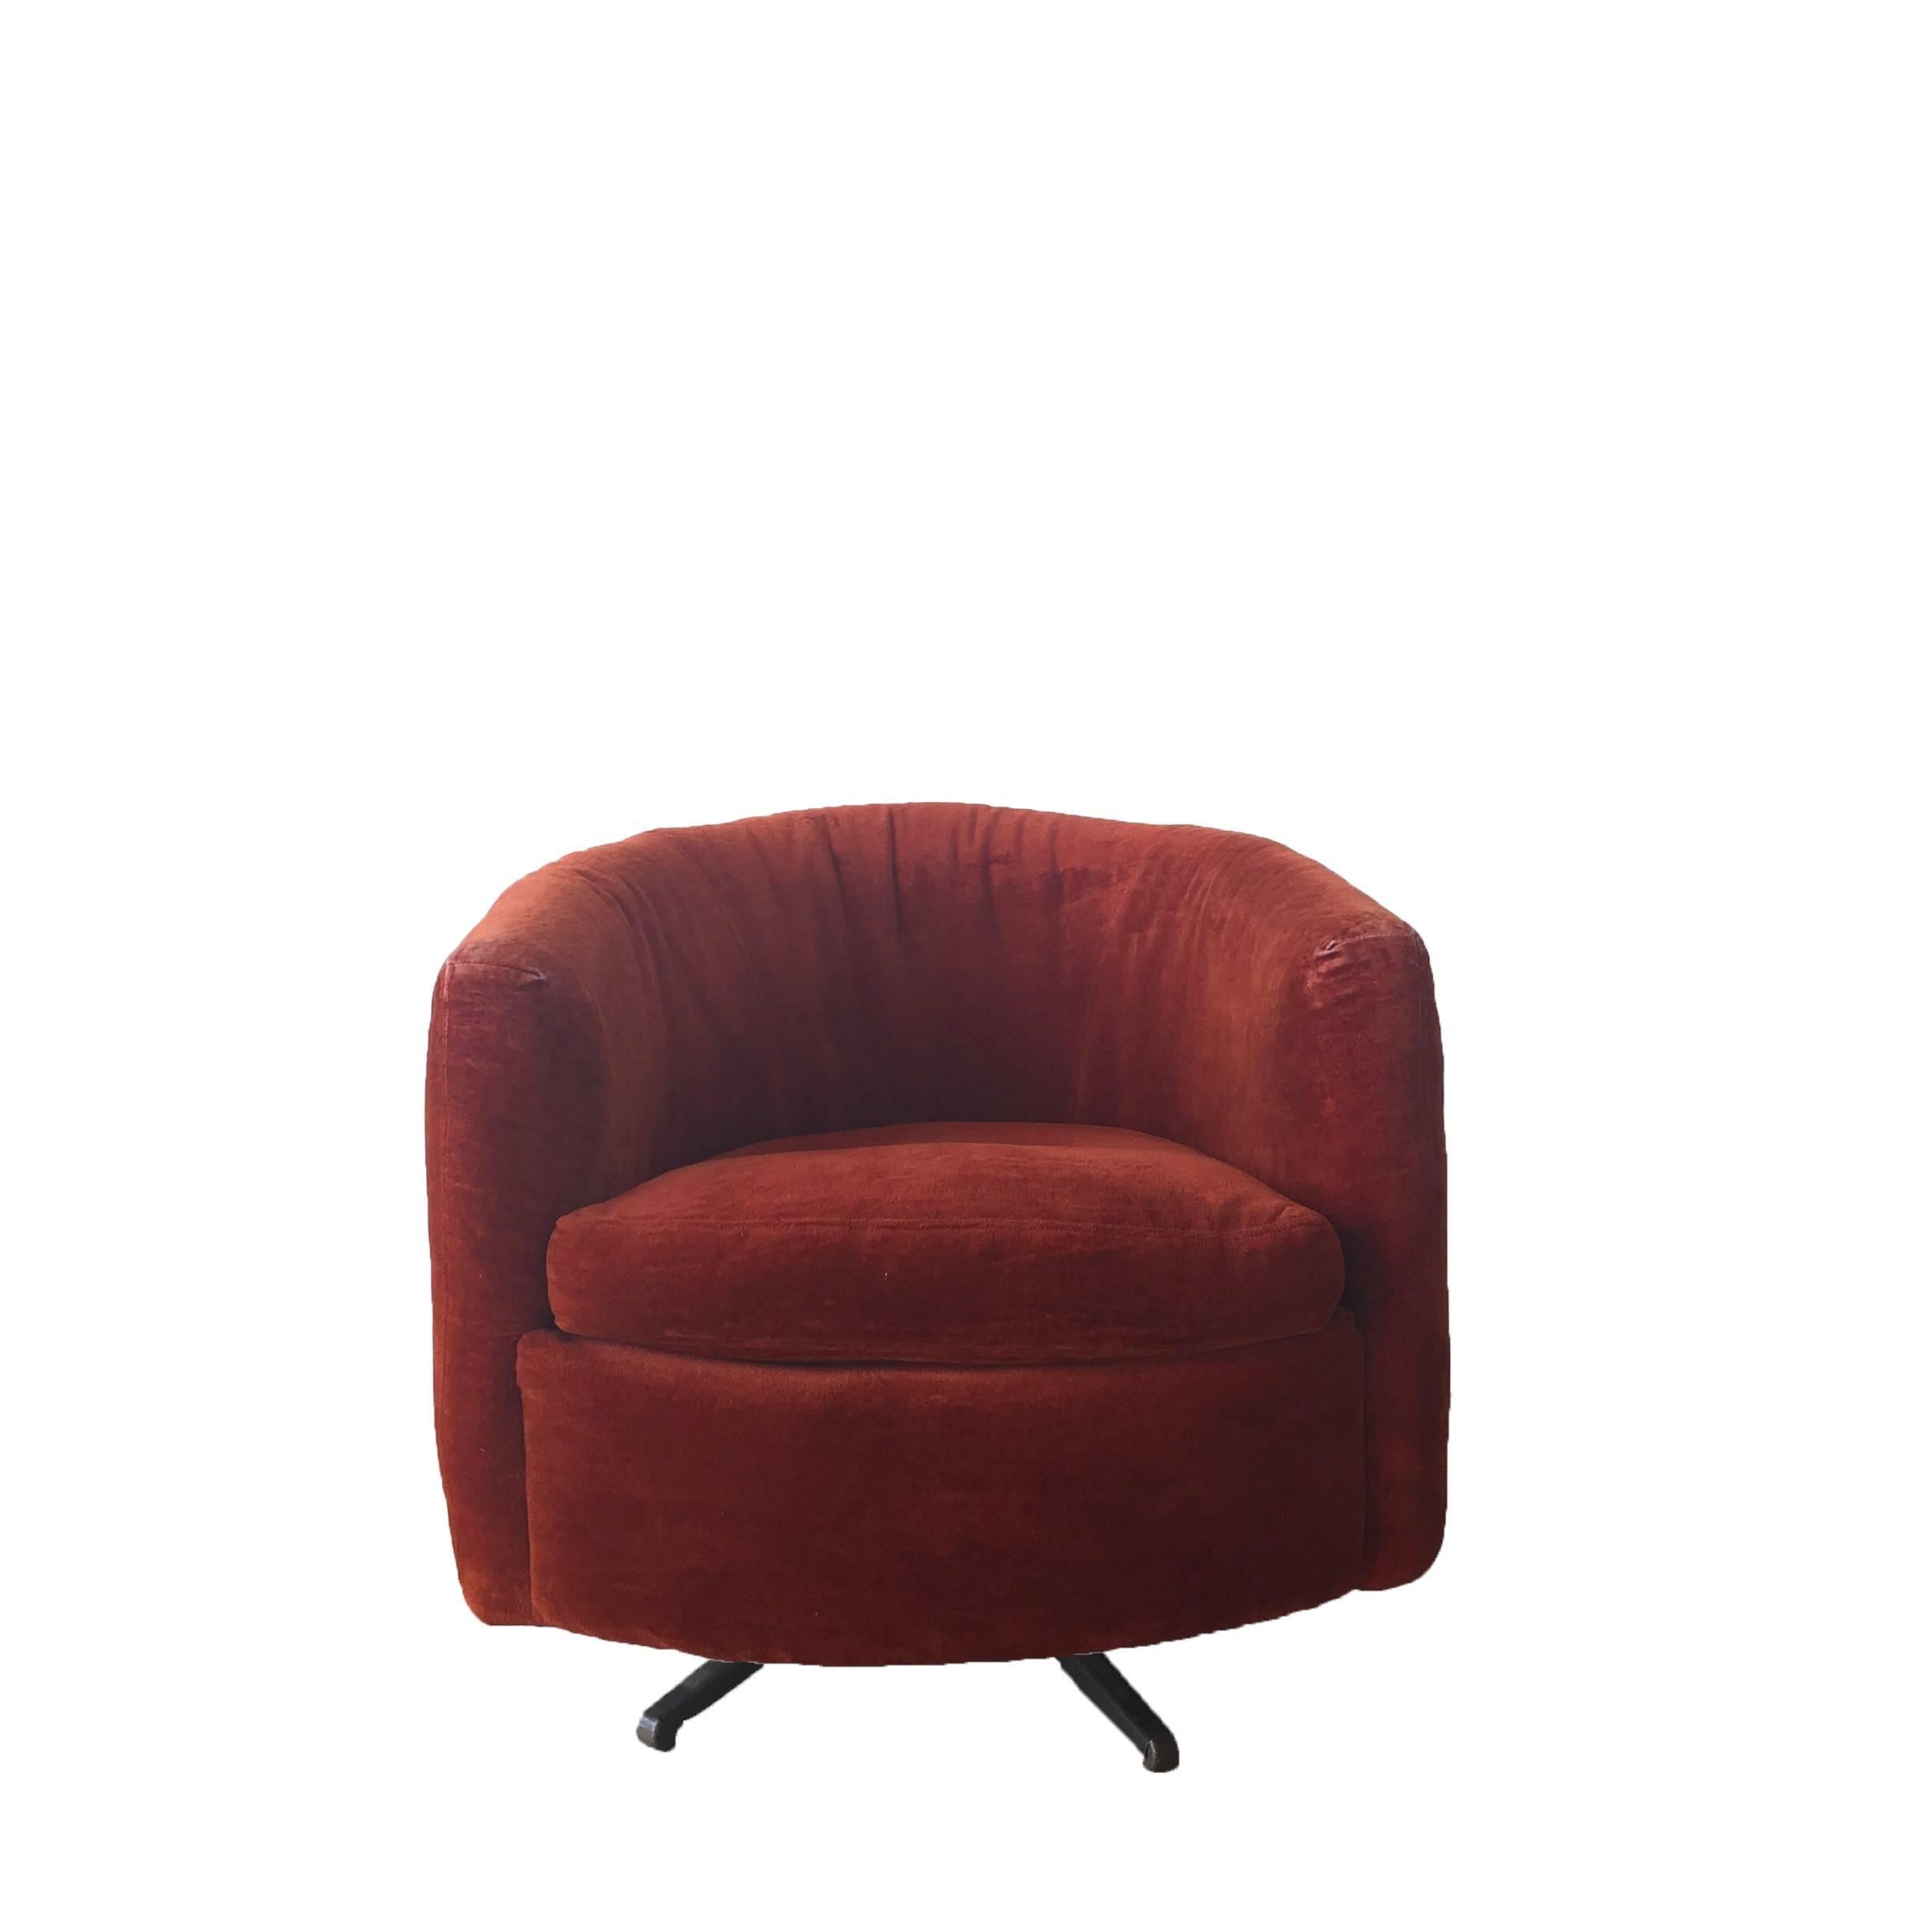 Luscious orange barrel-back swivel chair in classic Milo Baughman style. Manufactured by Thayer Coggin, circa 1970. Perfect for a living room, lounge, or man cave. Velour upholstery, metal base.

WAS $ 1999.00 NOW $ 1,599.00